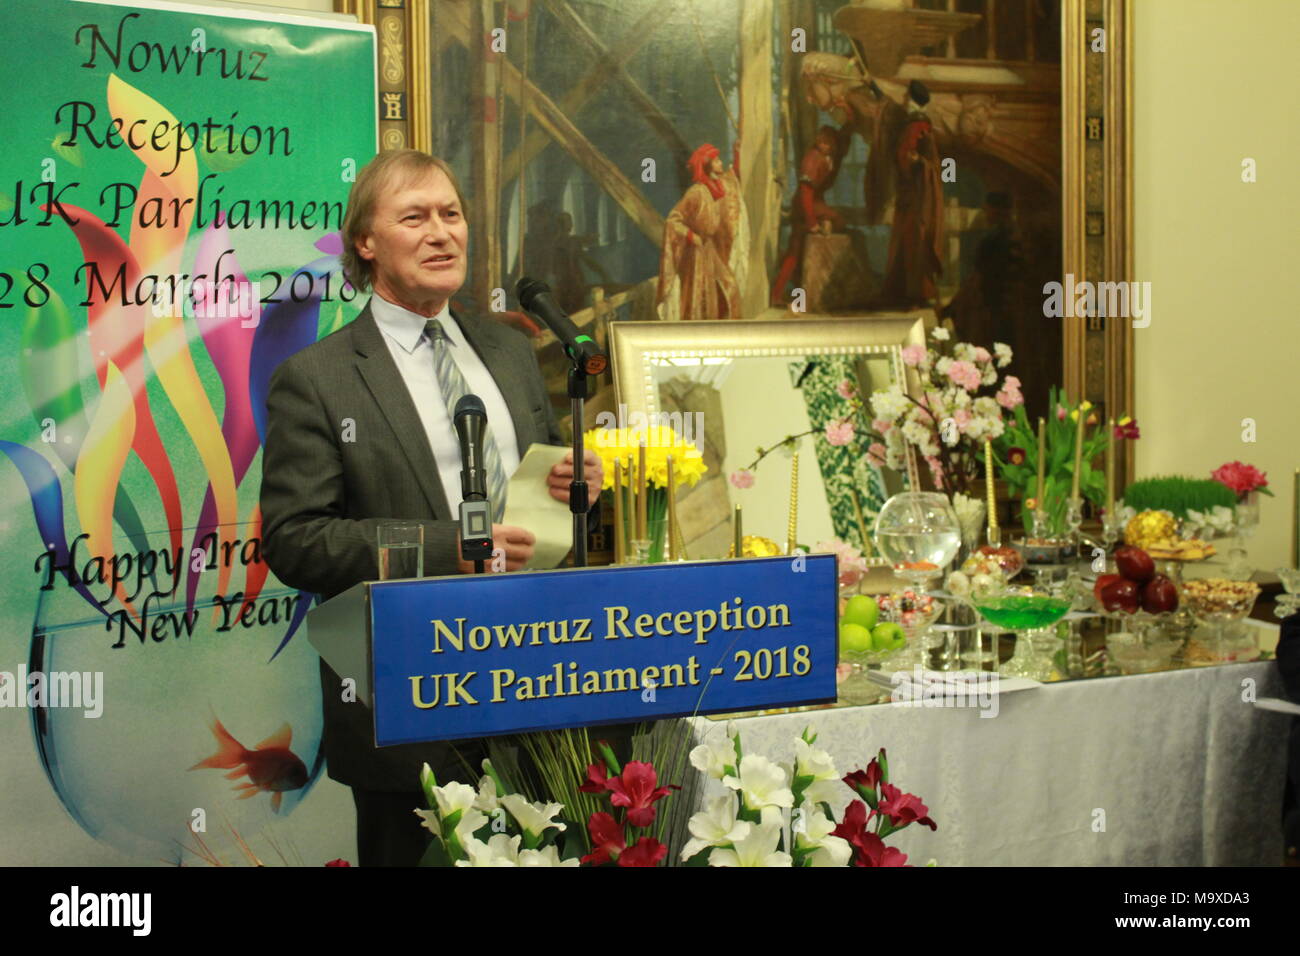 London, UK. 28th Mar, 2018. Sir David Amess MP, London, UK, 28/03/2018 - Cross-party MPs & Peers joined members of the Anglo-Iranian community for Nowruz celebration in the UK Parliament on Wednesday 28 March 2018. Sir David Amess MP, co-chair of the British Committee for Iran Freedom urged the UK Government to recognise and support the organised democratic opposition coalition, the NCRI, led by its President-elect, Maryam Rajavi, as a viable alternative to the current theocracy. Credit: Siavosh Hosseini/Alamy Live News Stock Photo